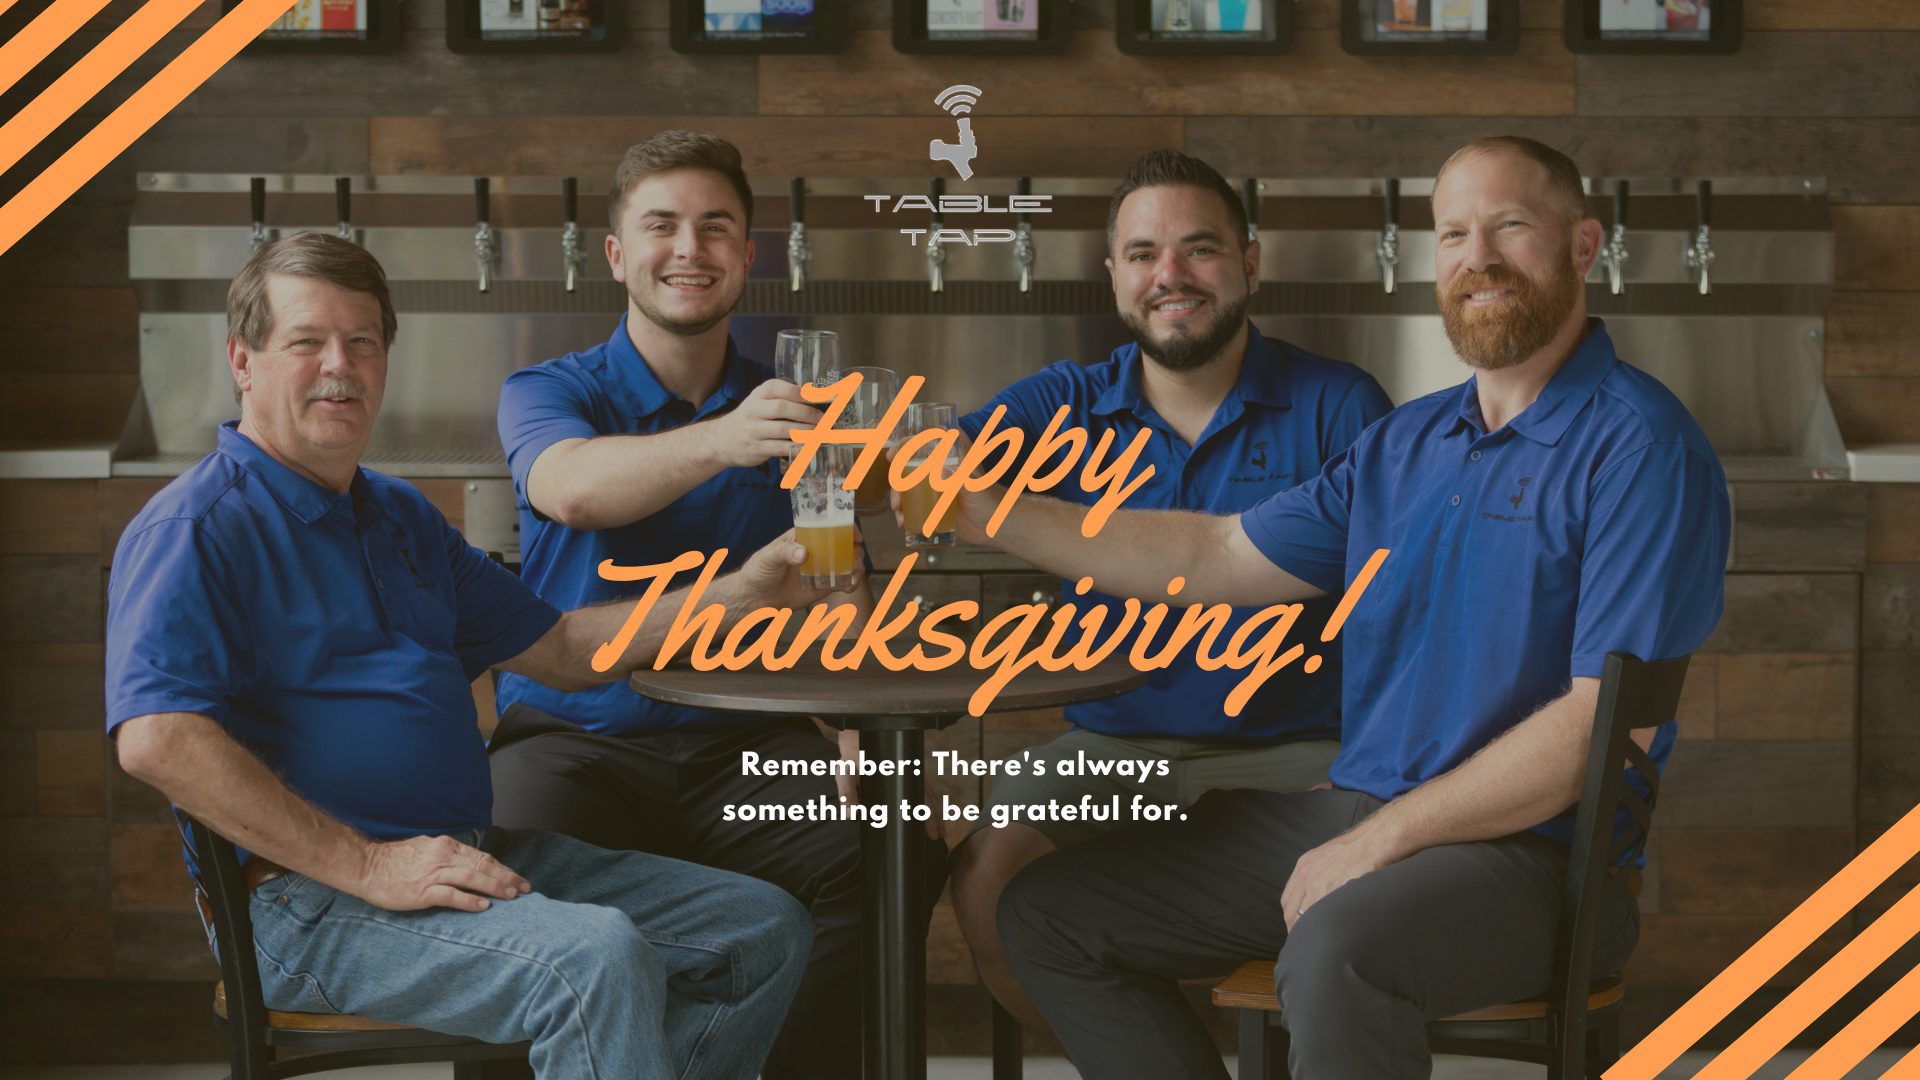 10+ Reasons why Table Tap is Thankful!